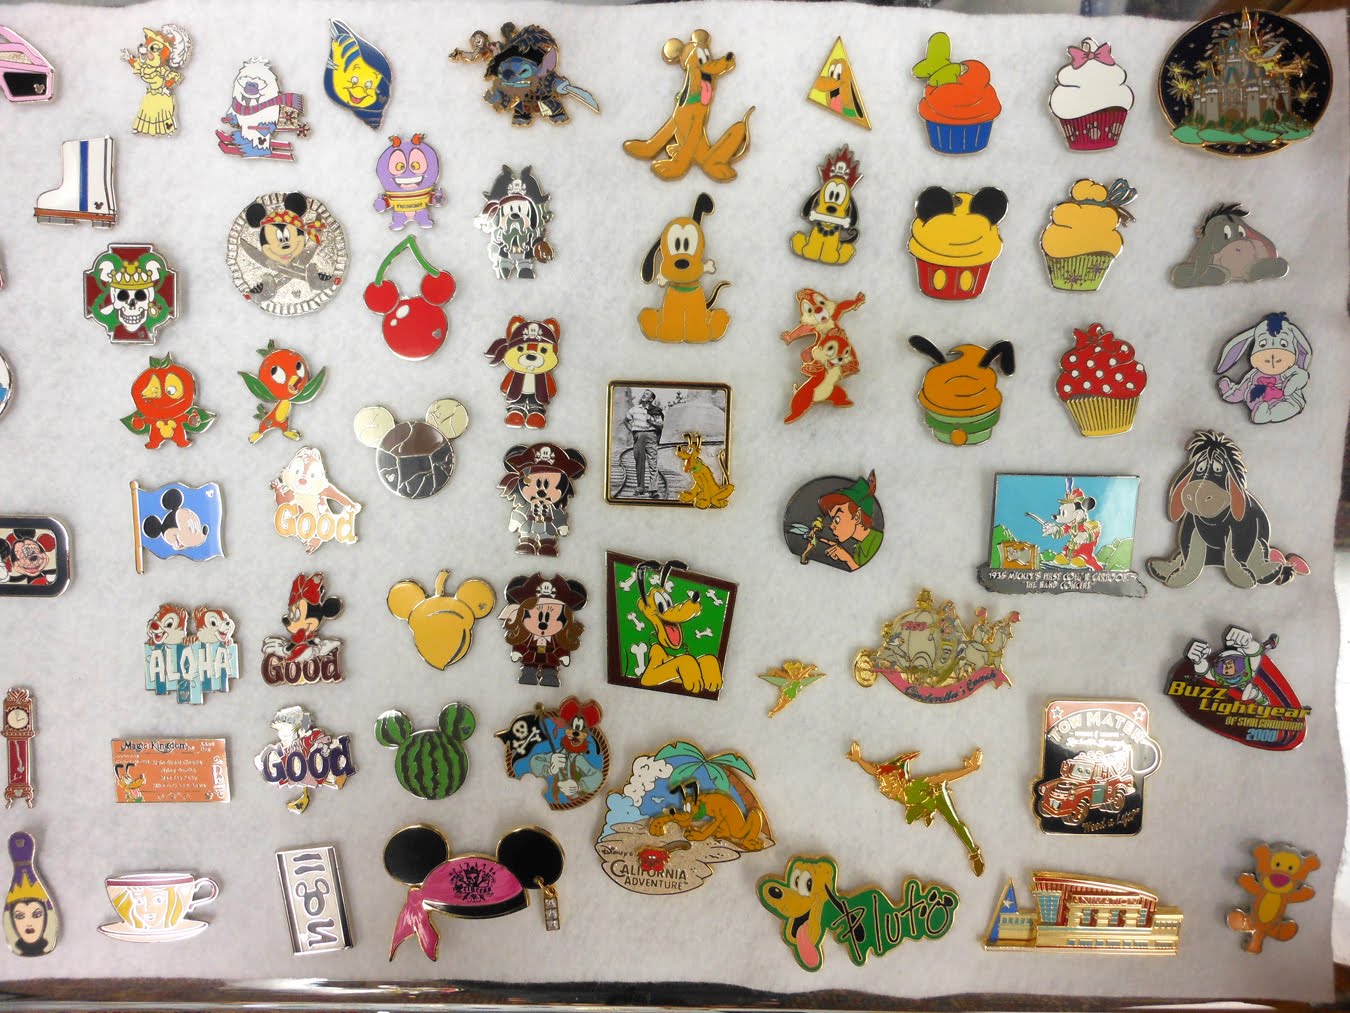 Hobbies on Display: September 2012 - Cassidy's Disney Pins Collection